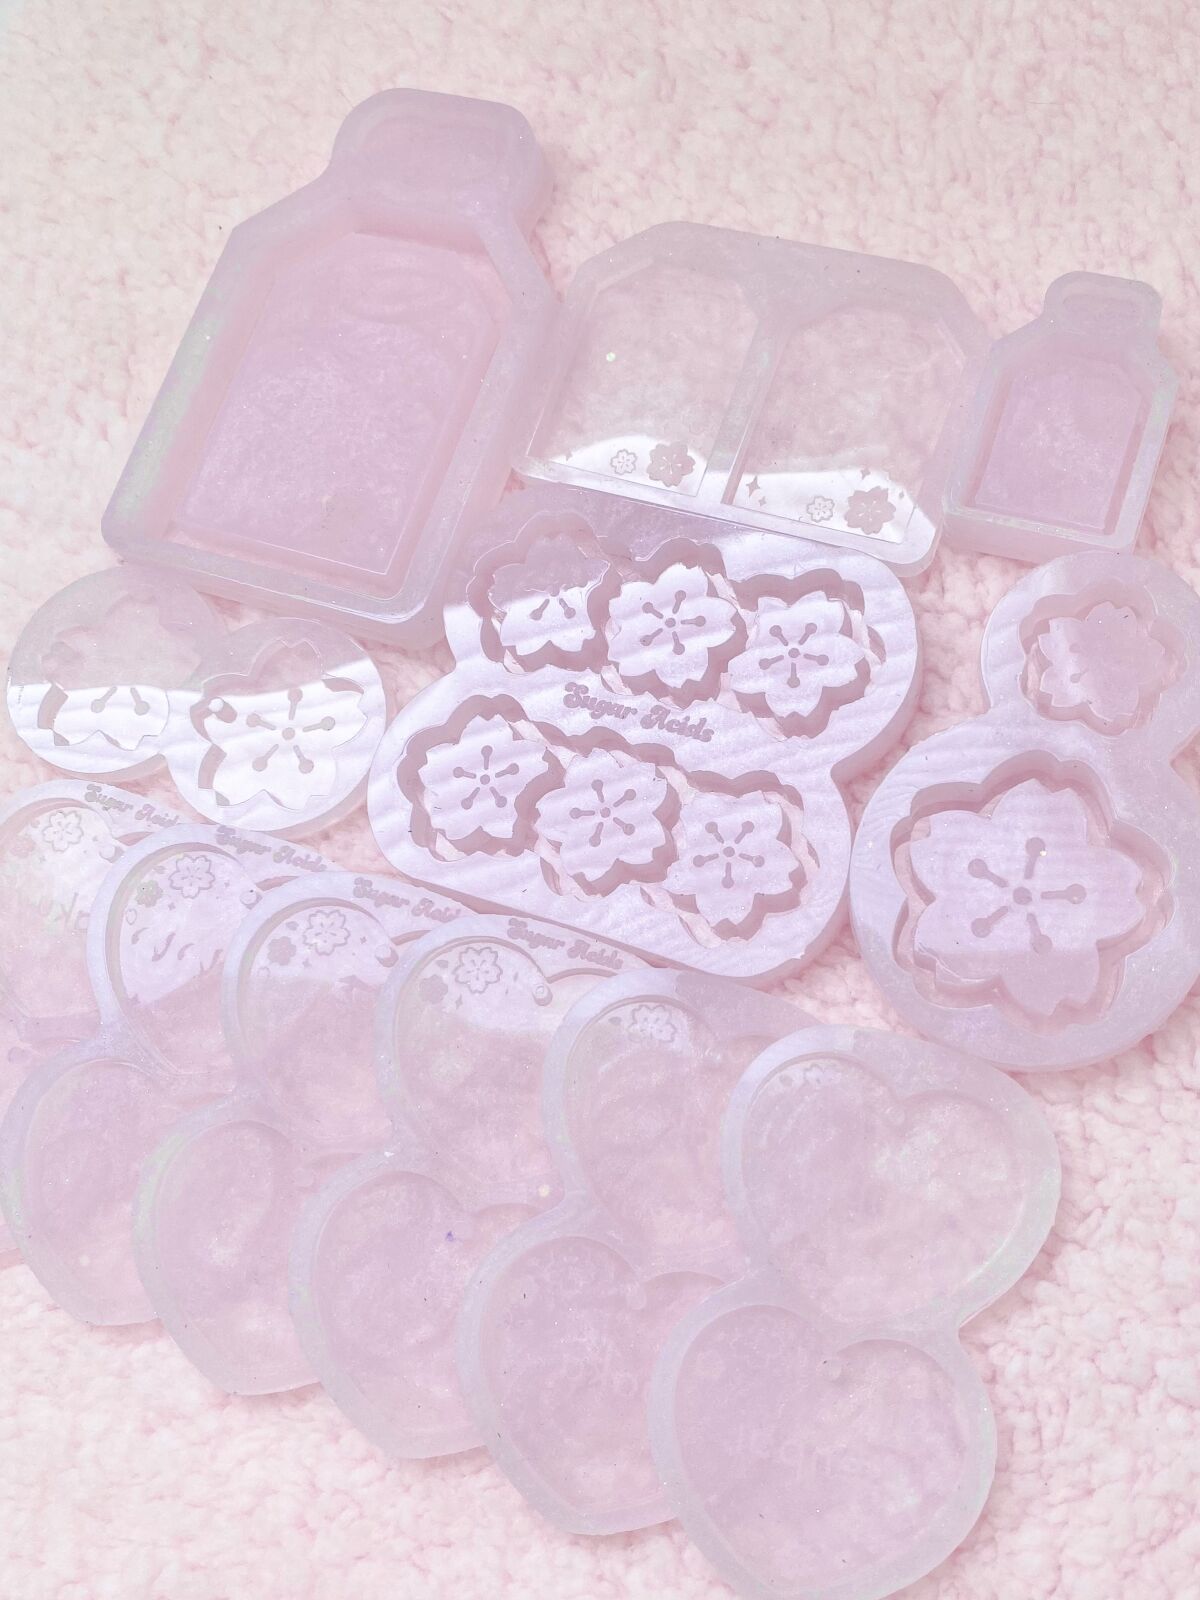 Silicone molds from Sugar Acids.